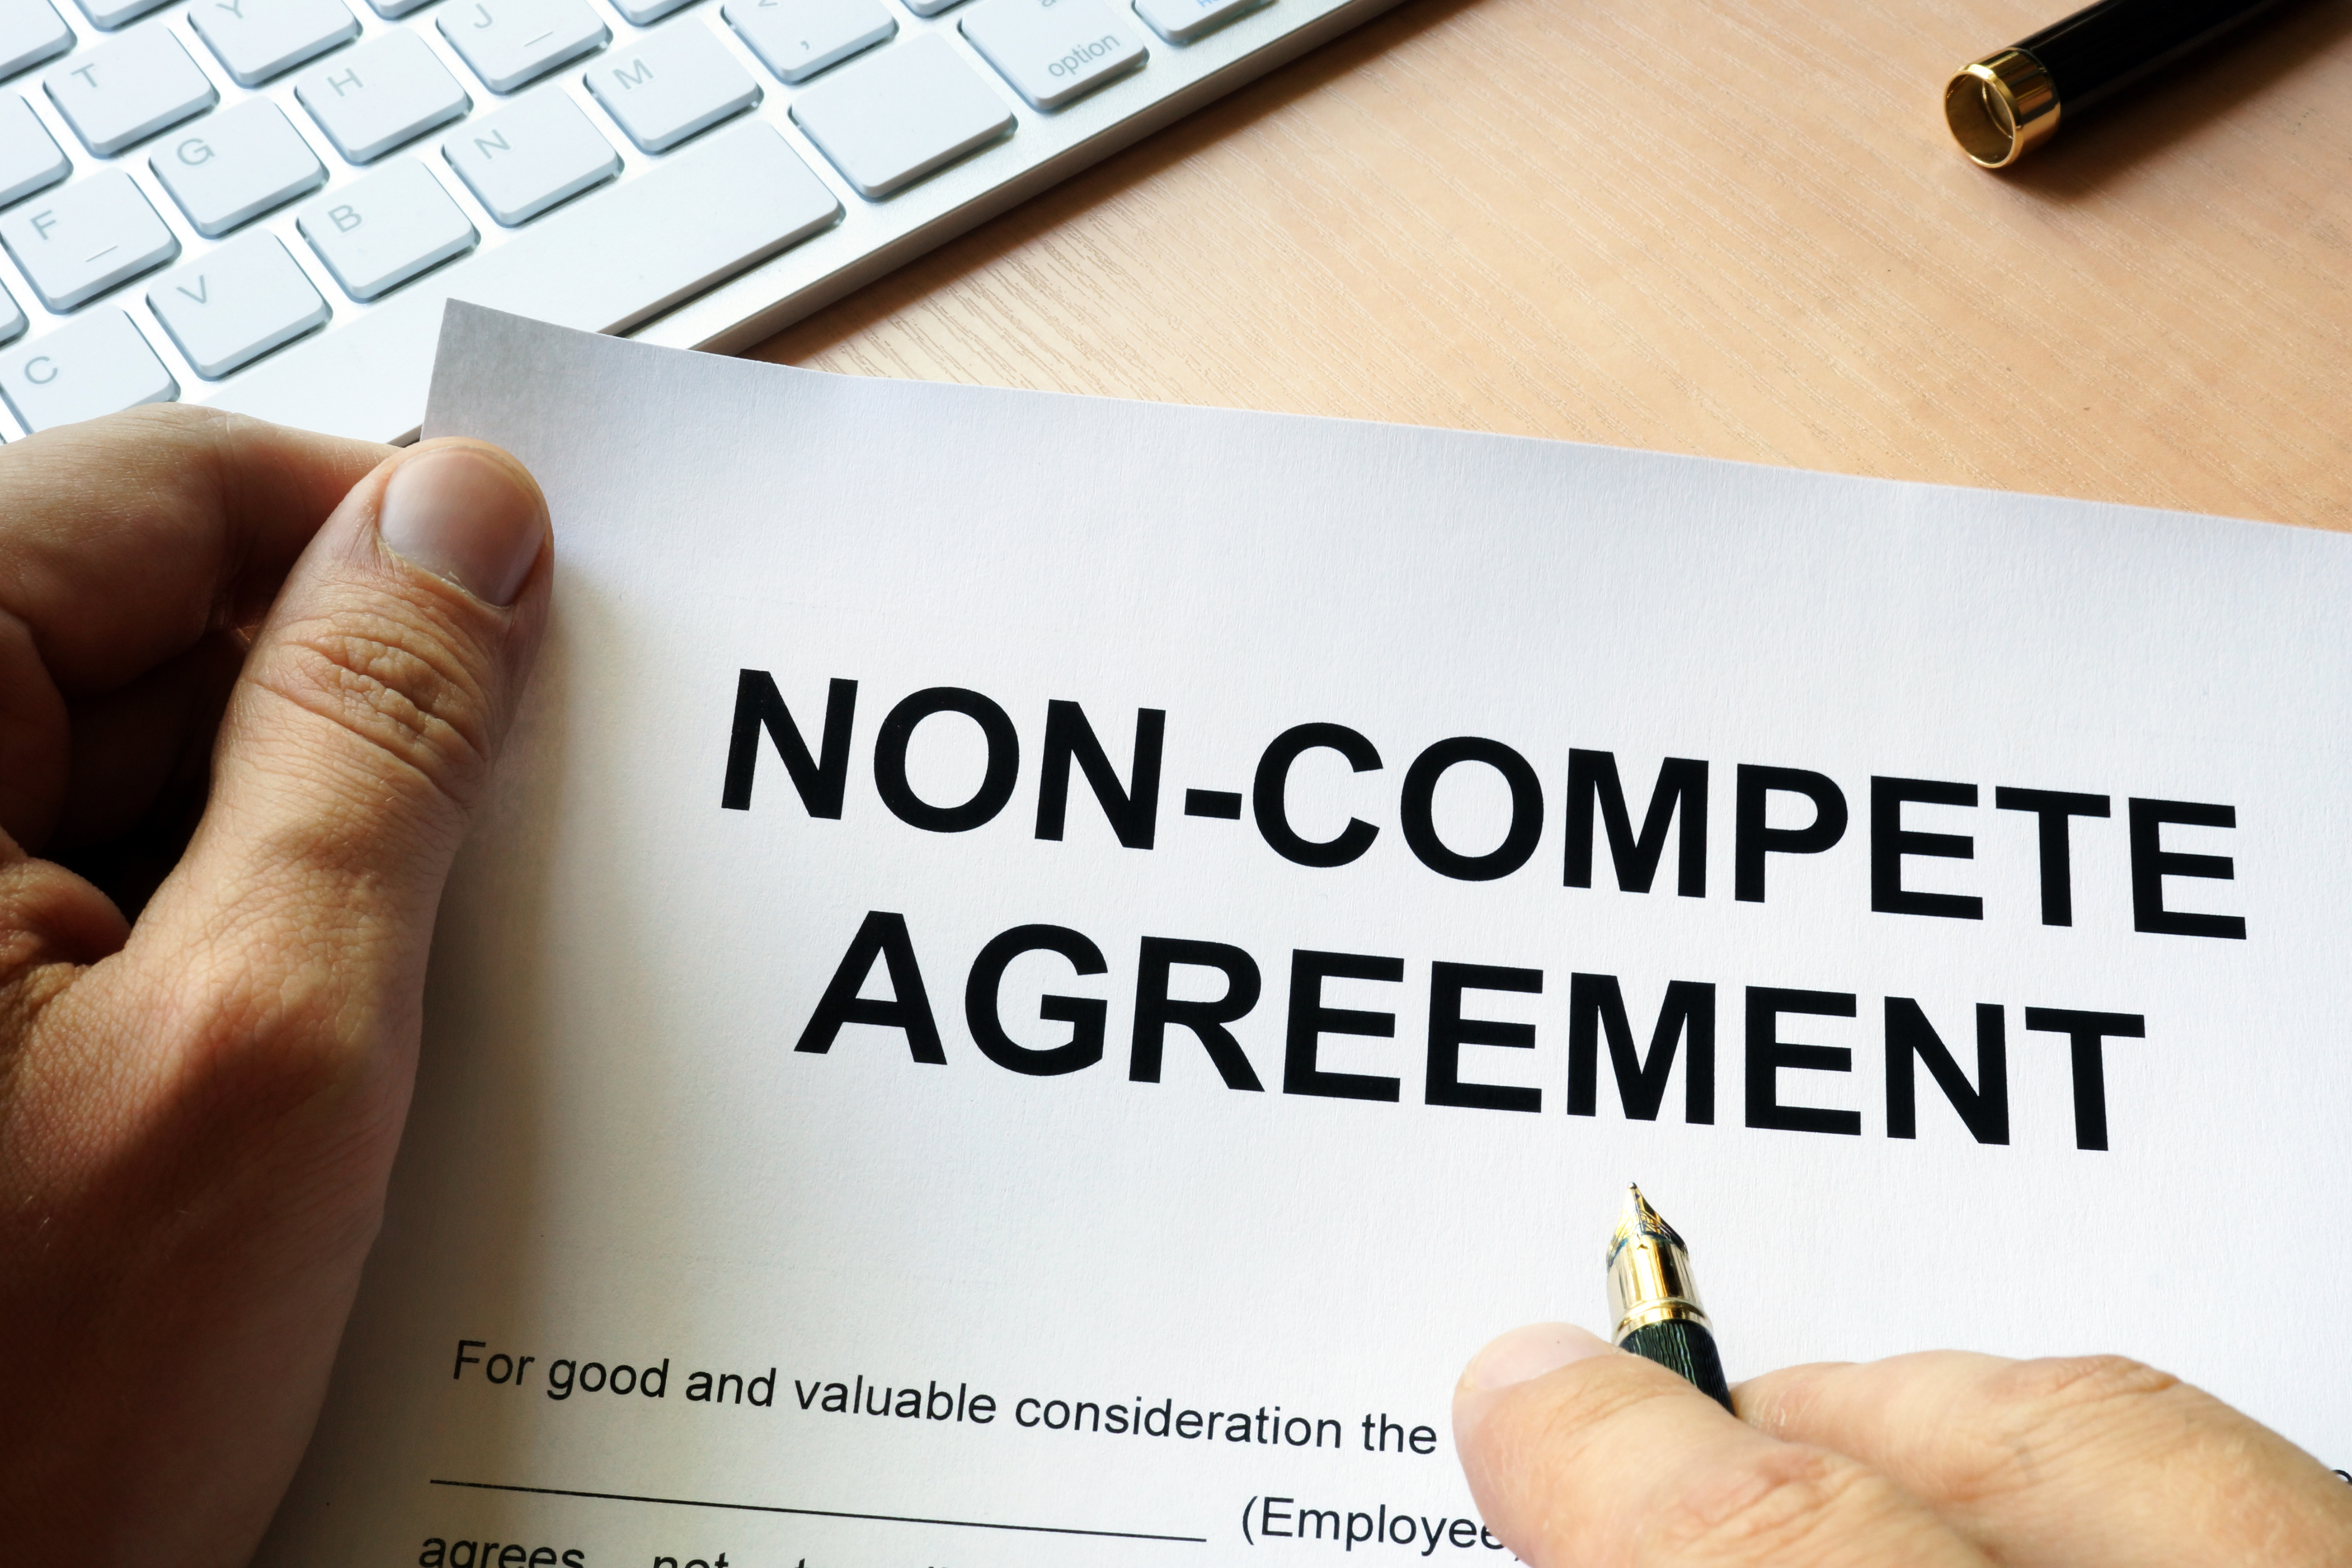 Non Compete Agreement Colorado Is Your Non Compete Agreement Enforceable Heres 4 Ways To Know